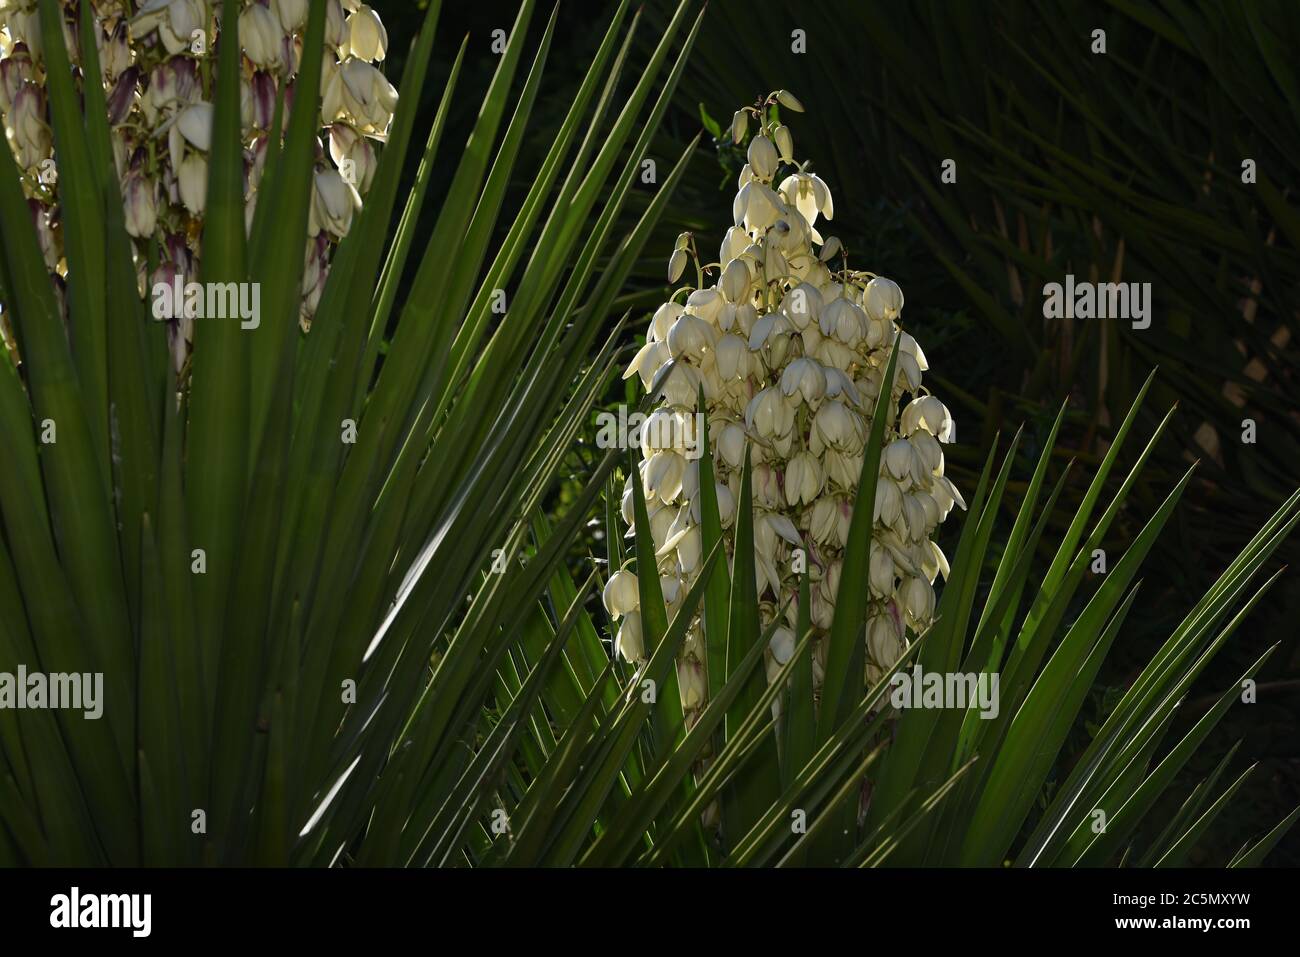 Yucca blooms a beautiful white flower. Stock Photo